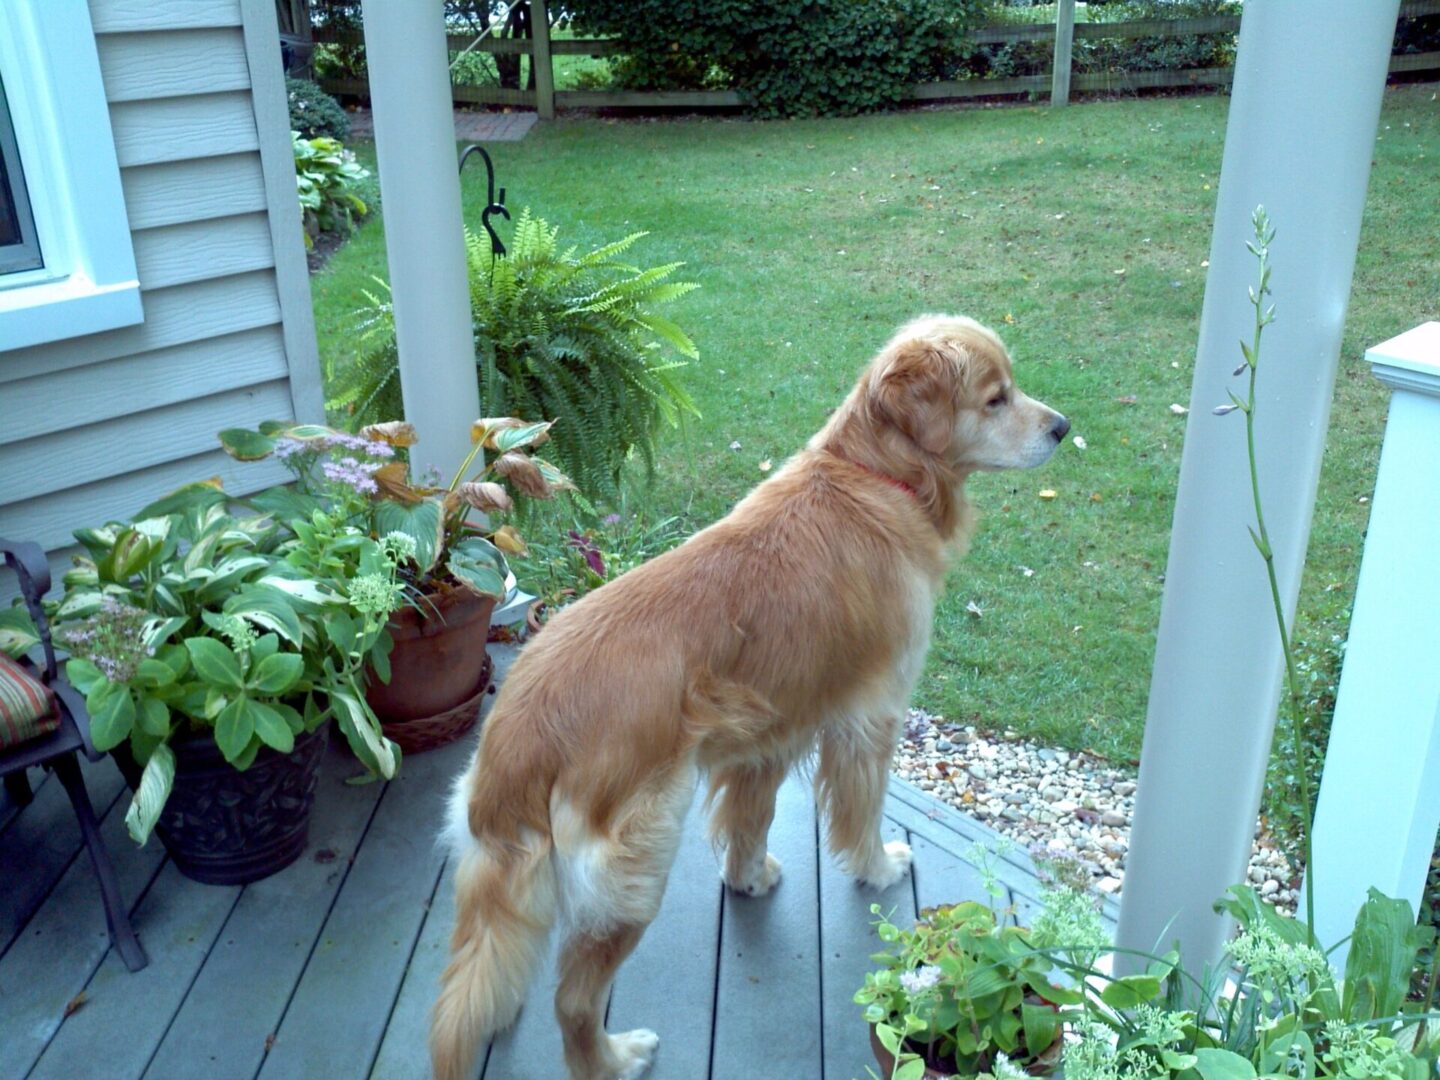 Golden retriever standing on a wooden porch looking out into the yard.